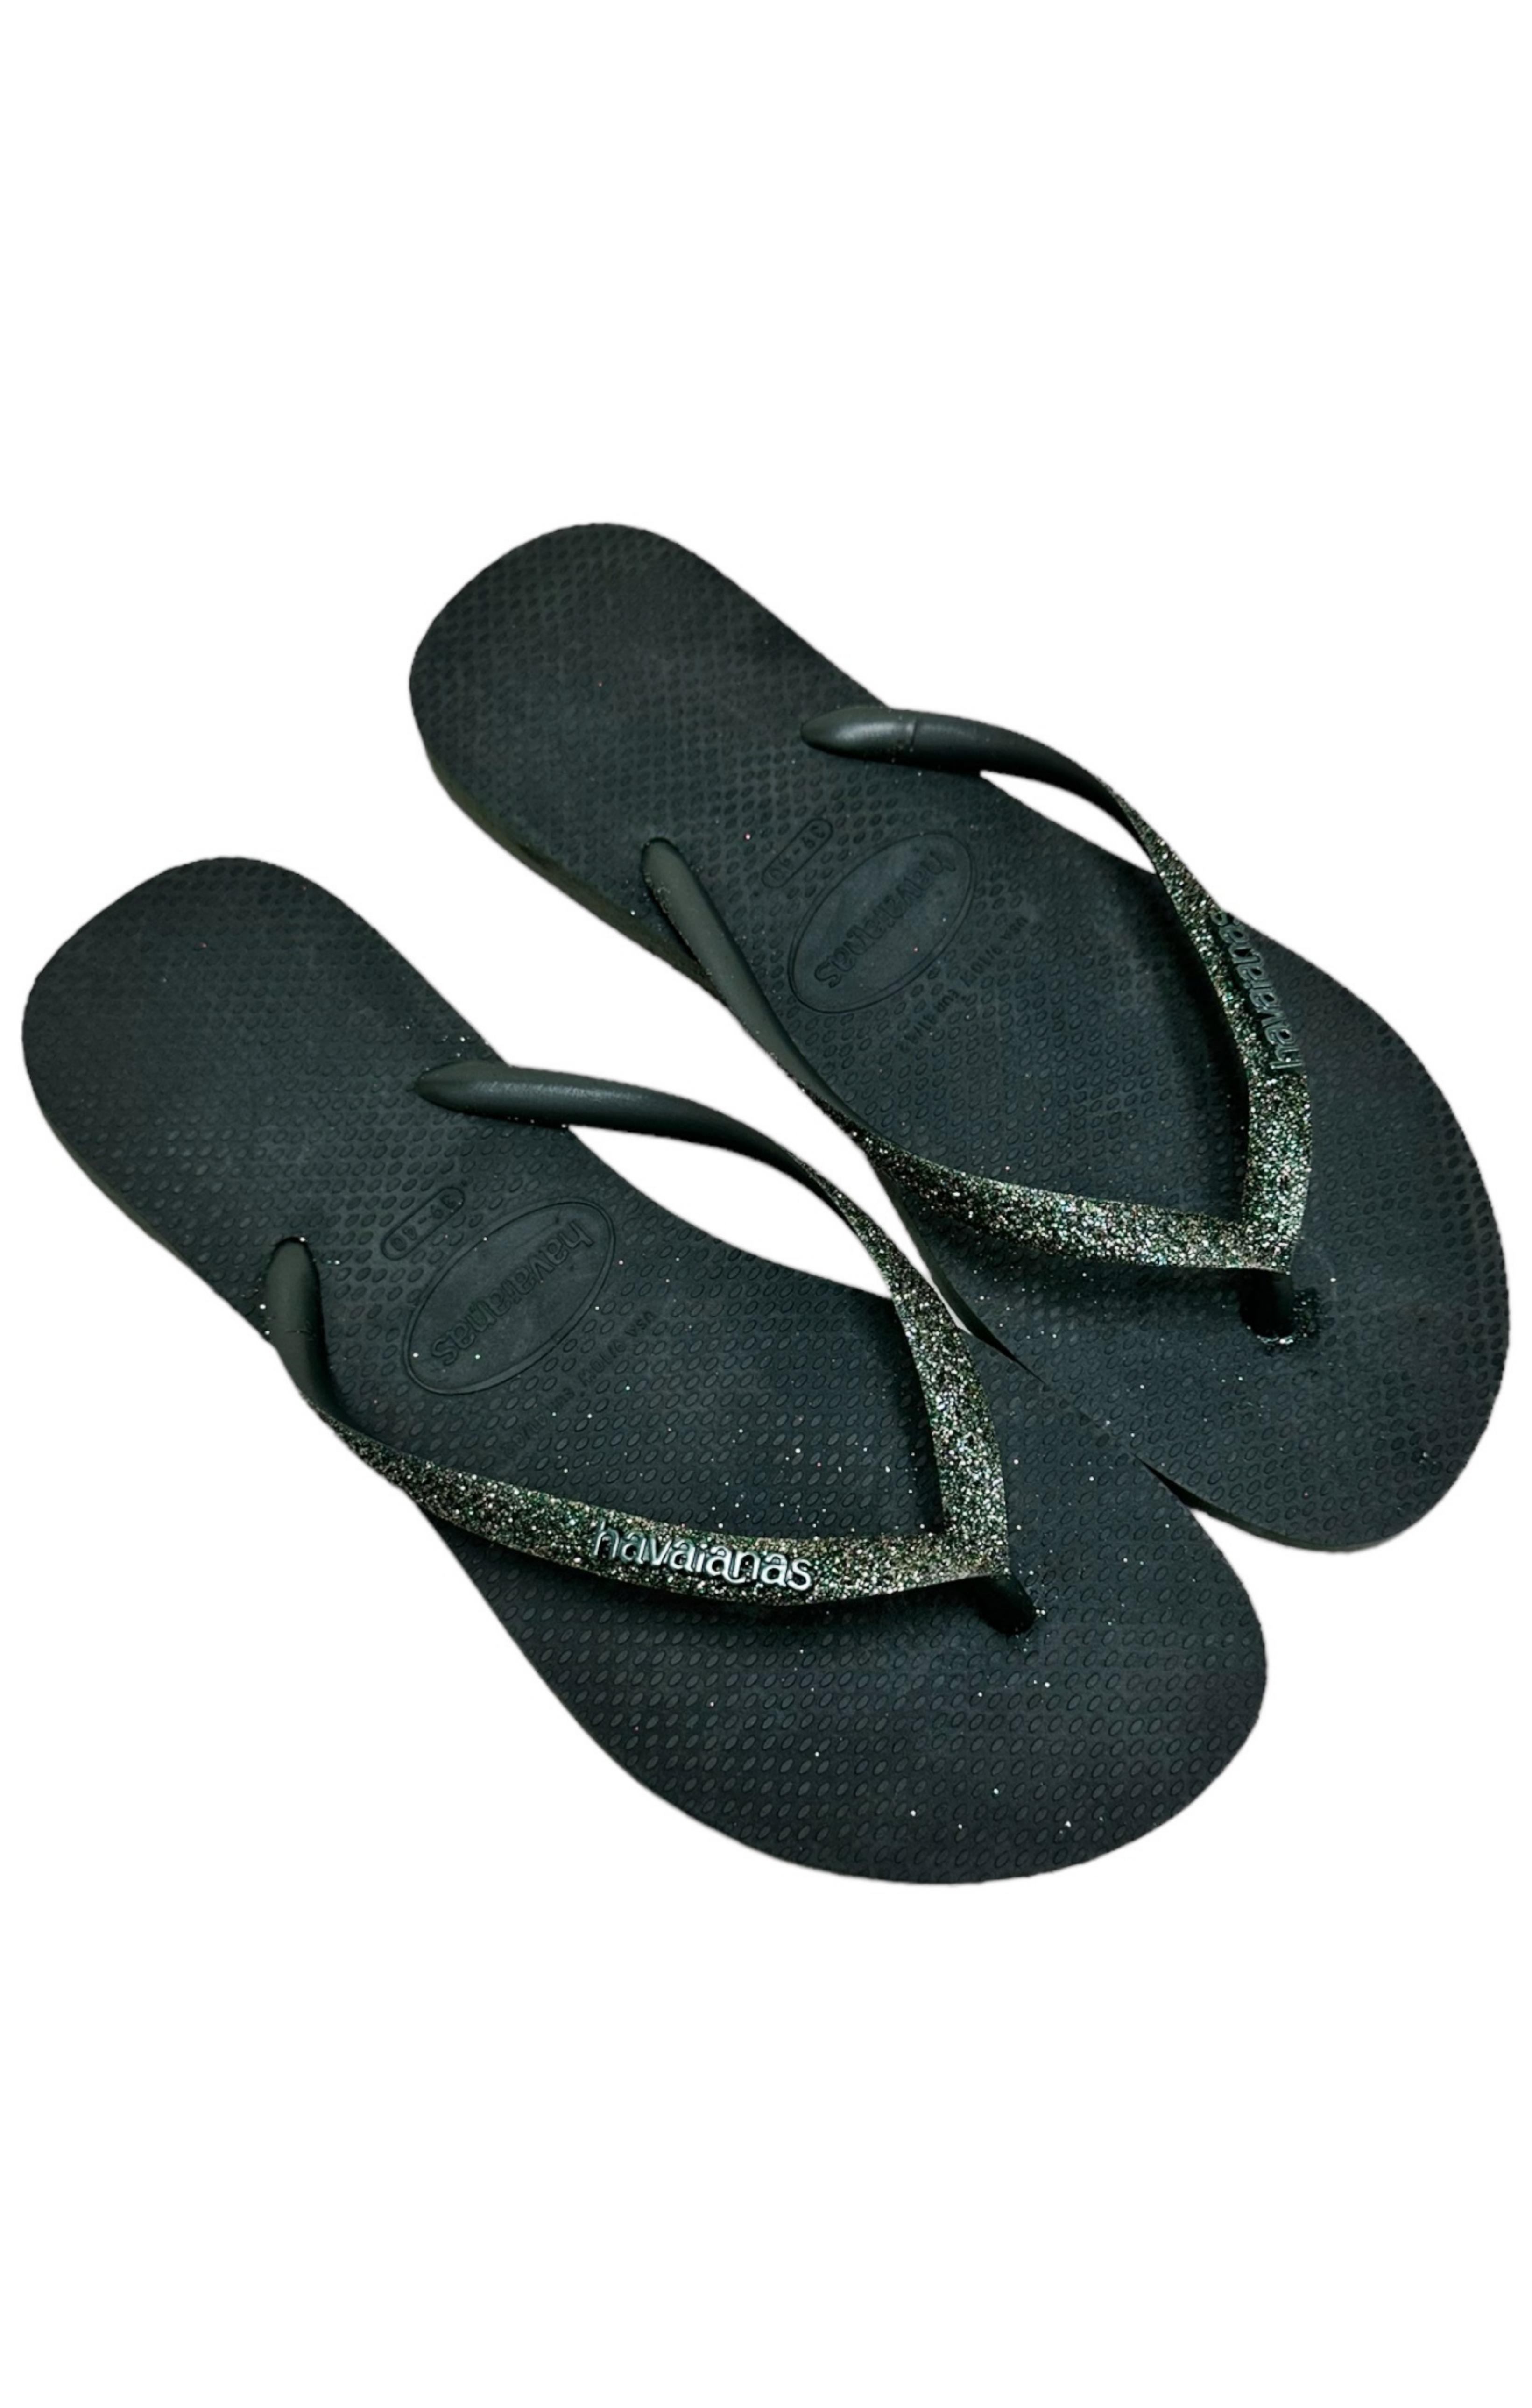 HAVAIANAS (NEW) Sandals Size: Marked an EUR 39-40, fit like US 9-10